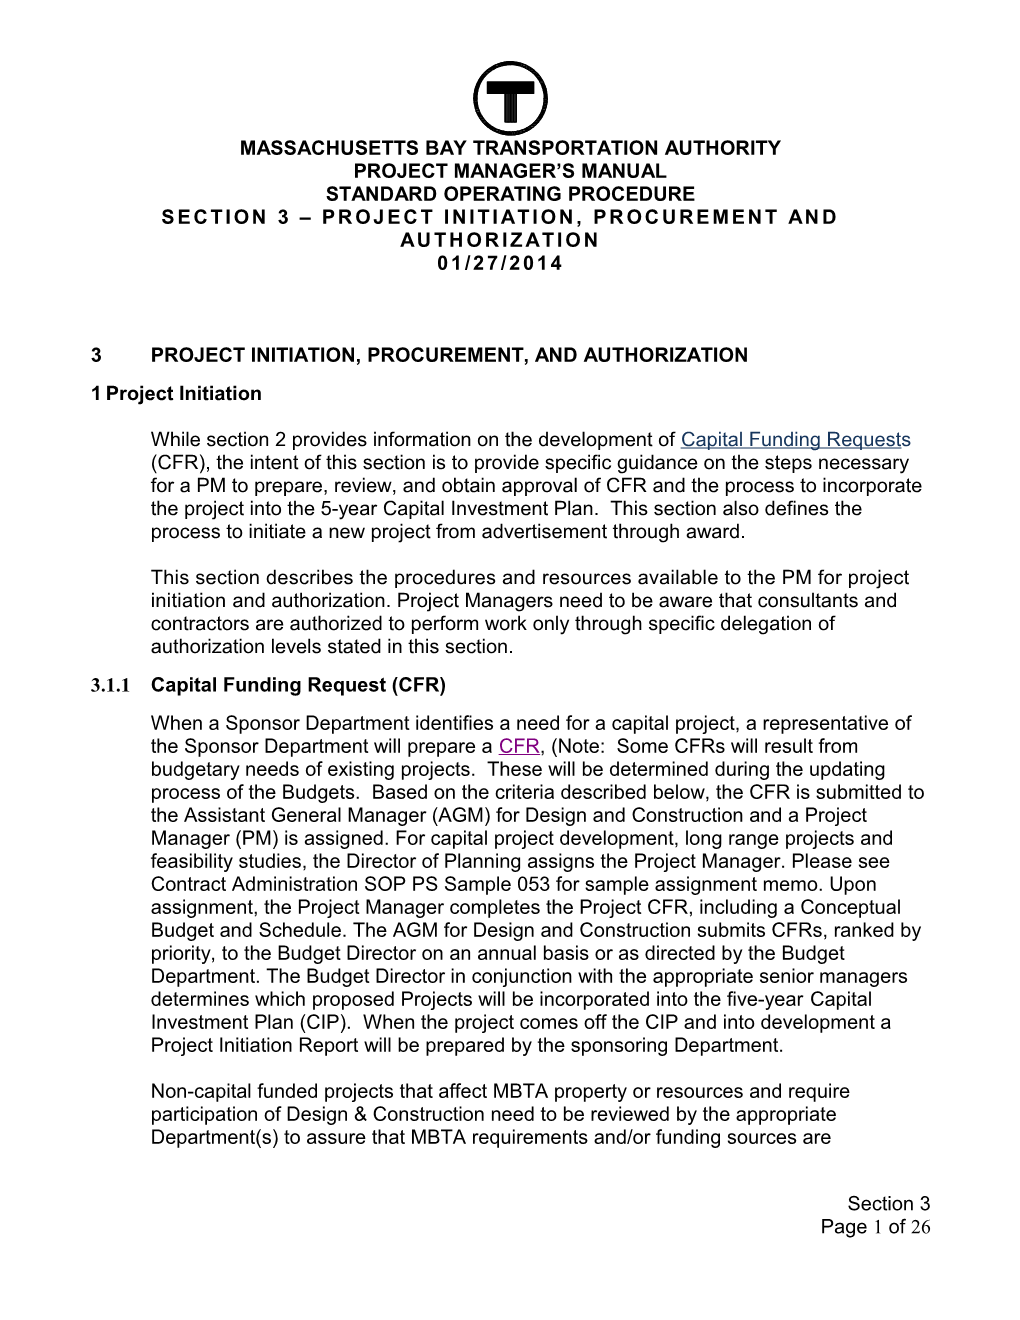 Section 03 - PROJECT INITIATION, AUTHORIZATION, AND AWARD